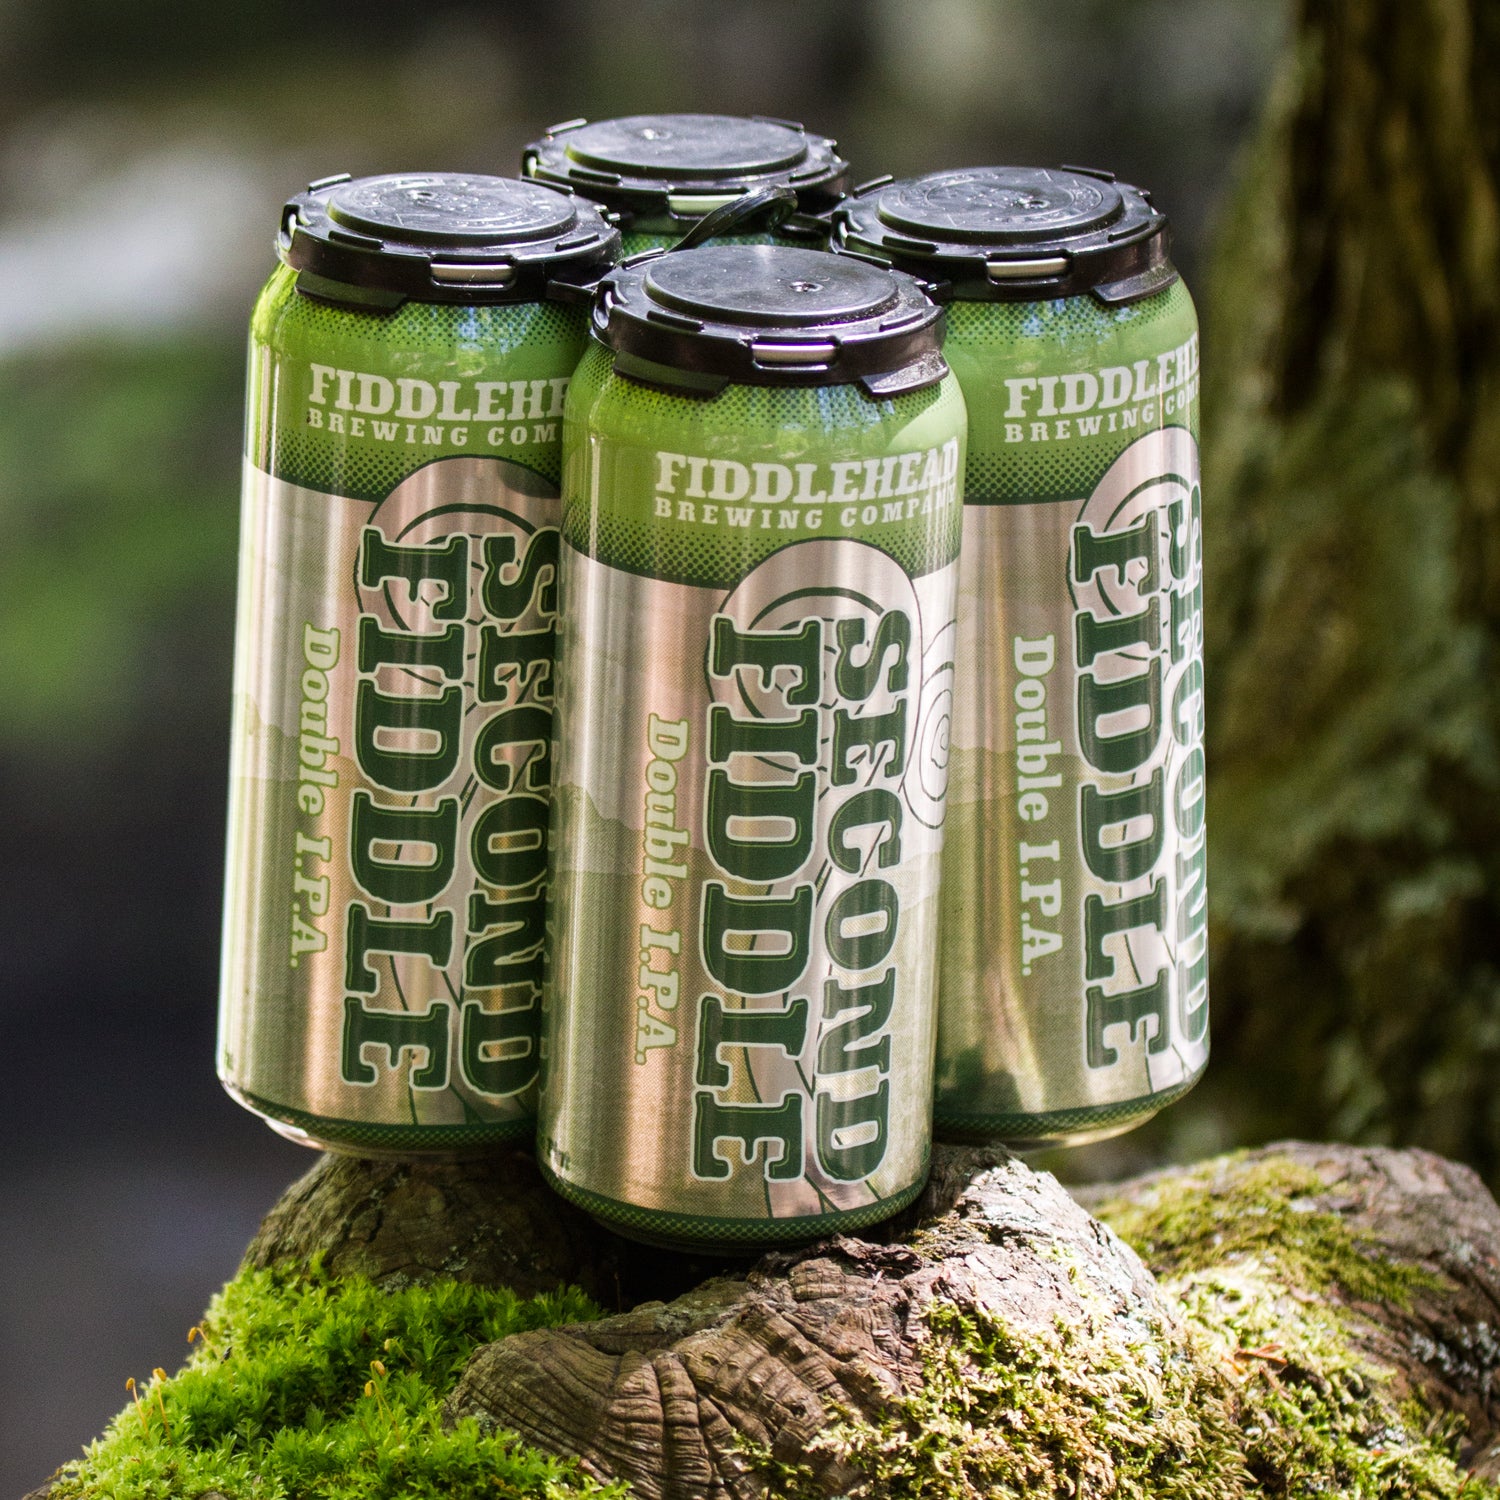 canned beer, outside, fiddlehead brewing second fiddle double ipa